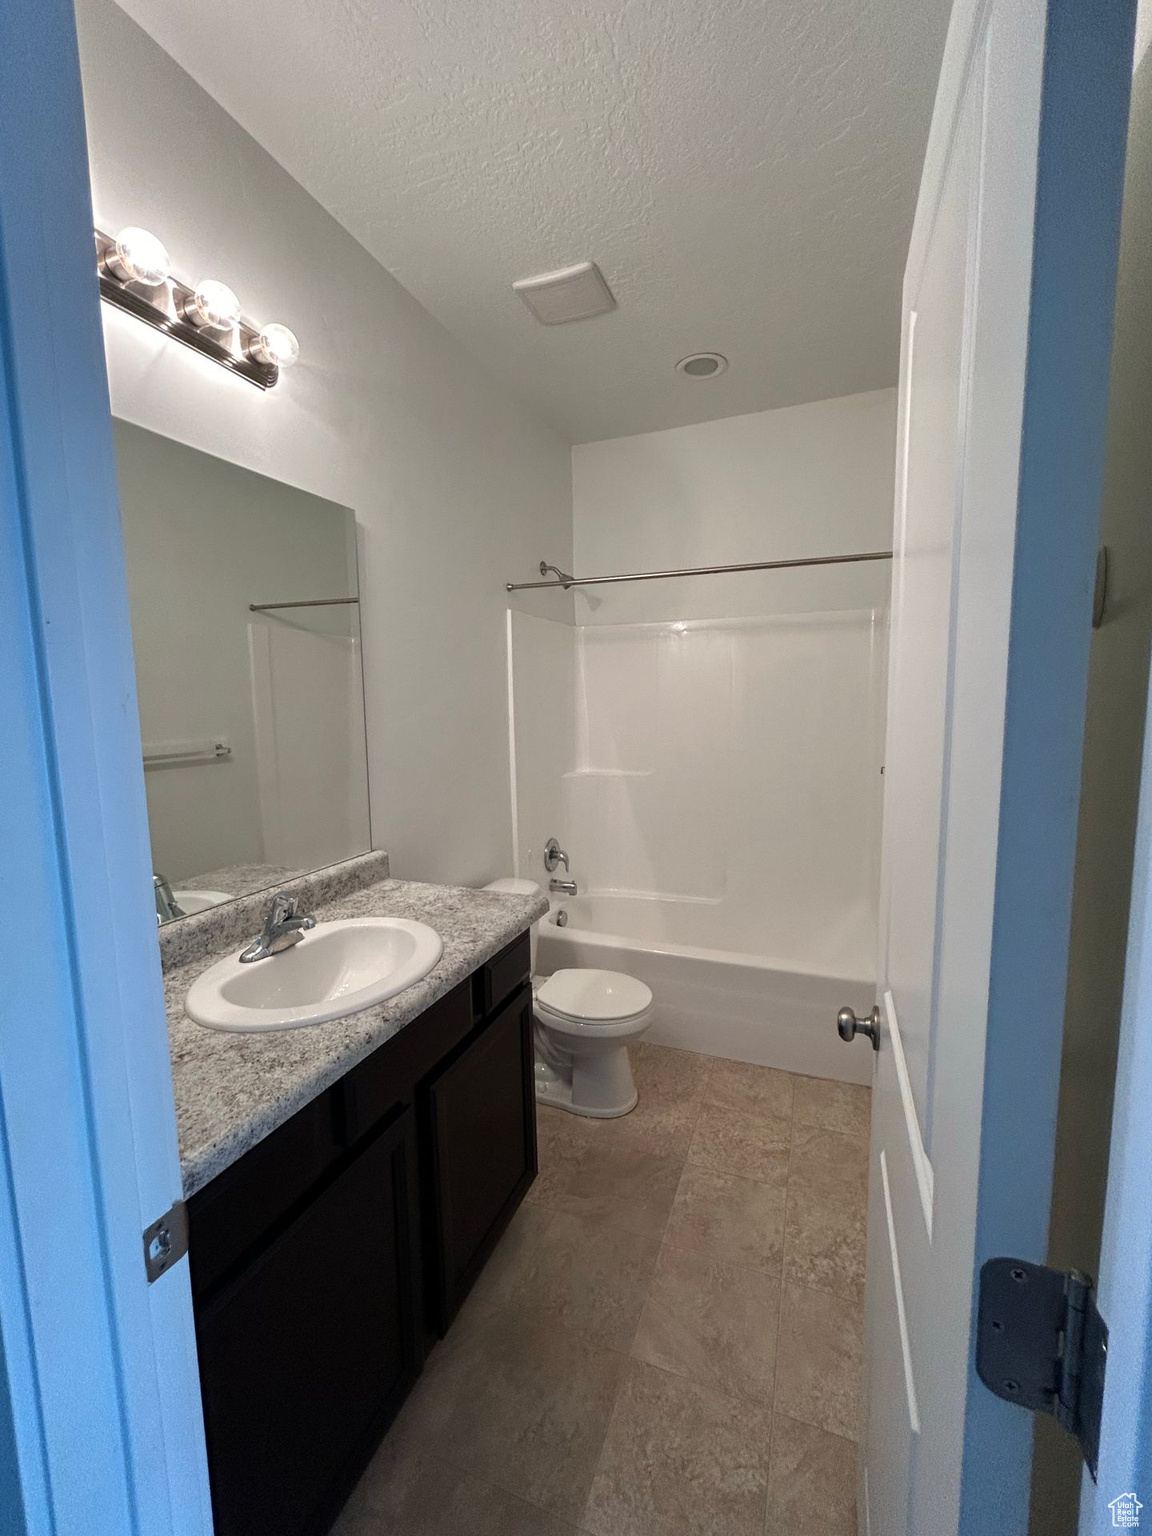 Full bathroom with bathing tub / shower combination, toilet, a textured ceiling, vanity, and tile floors